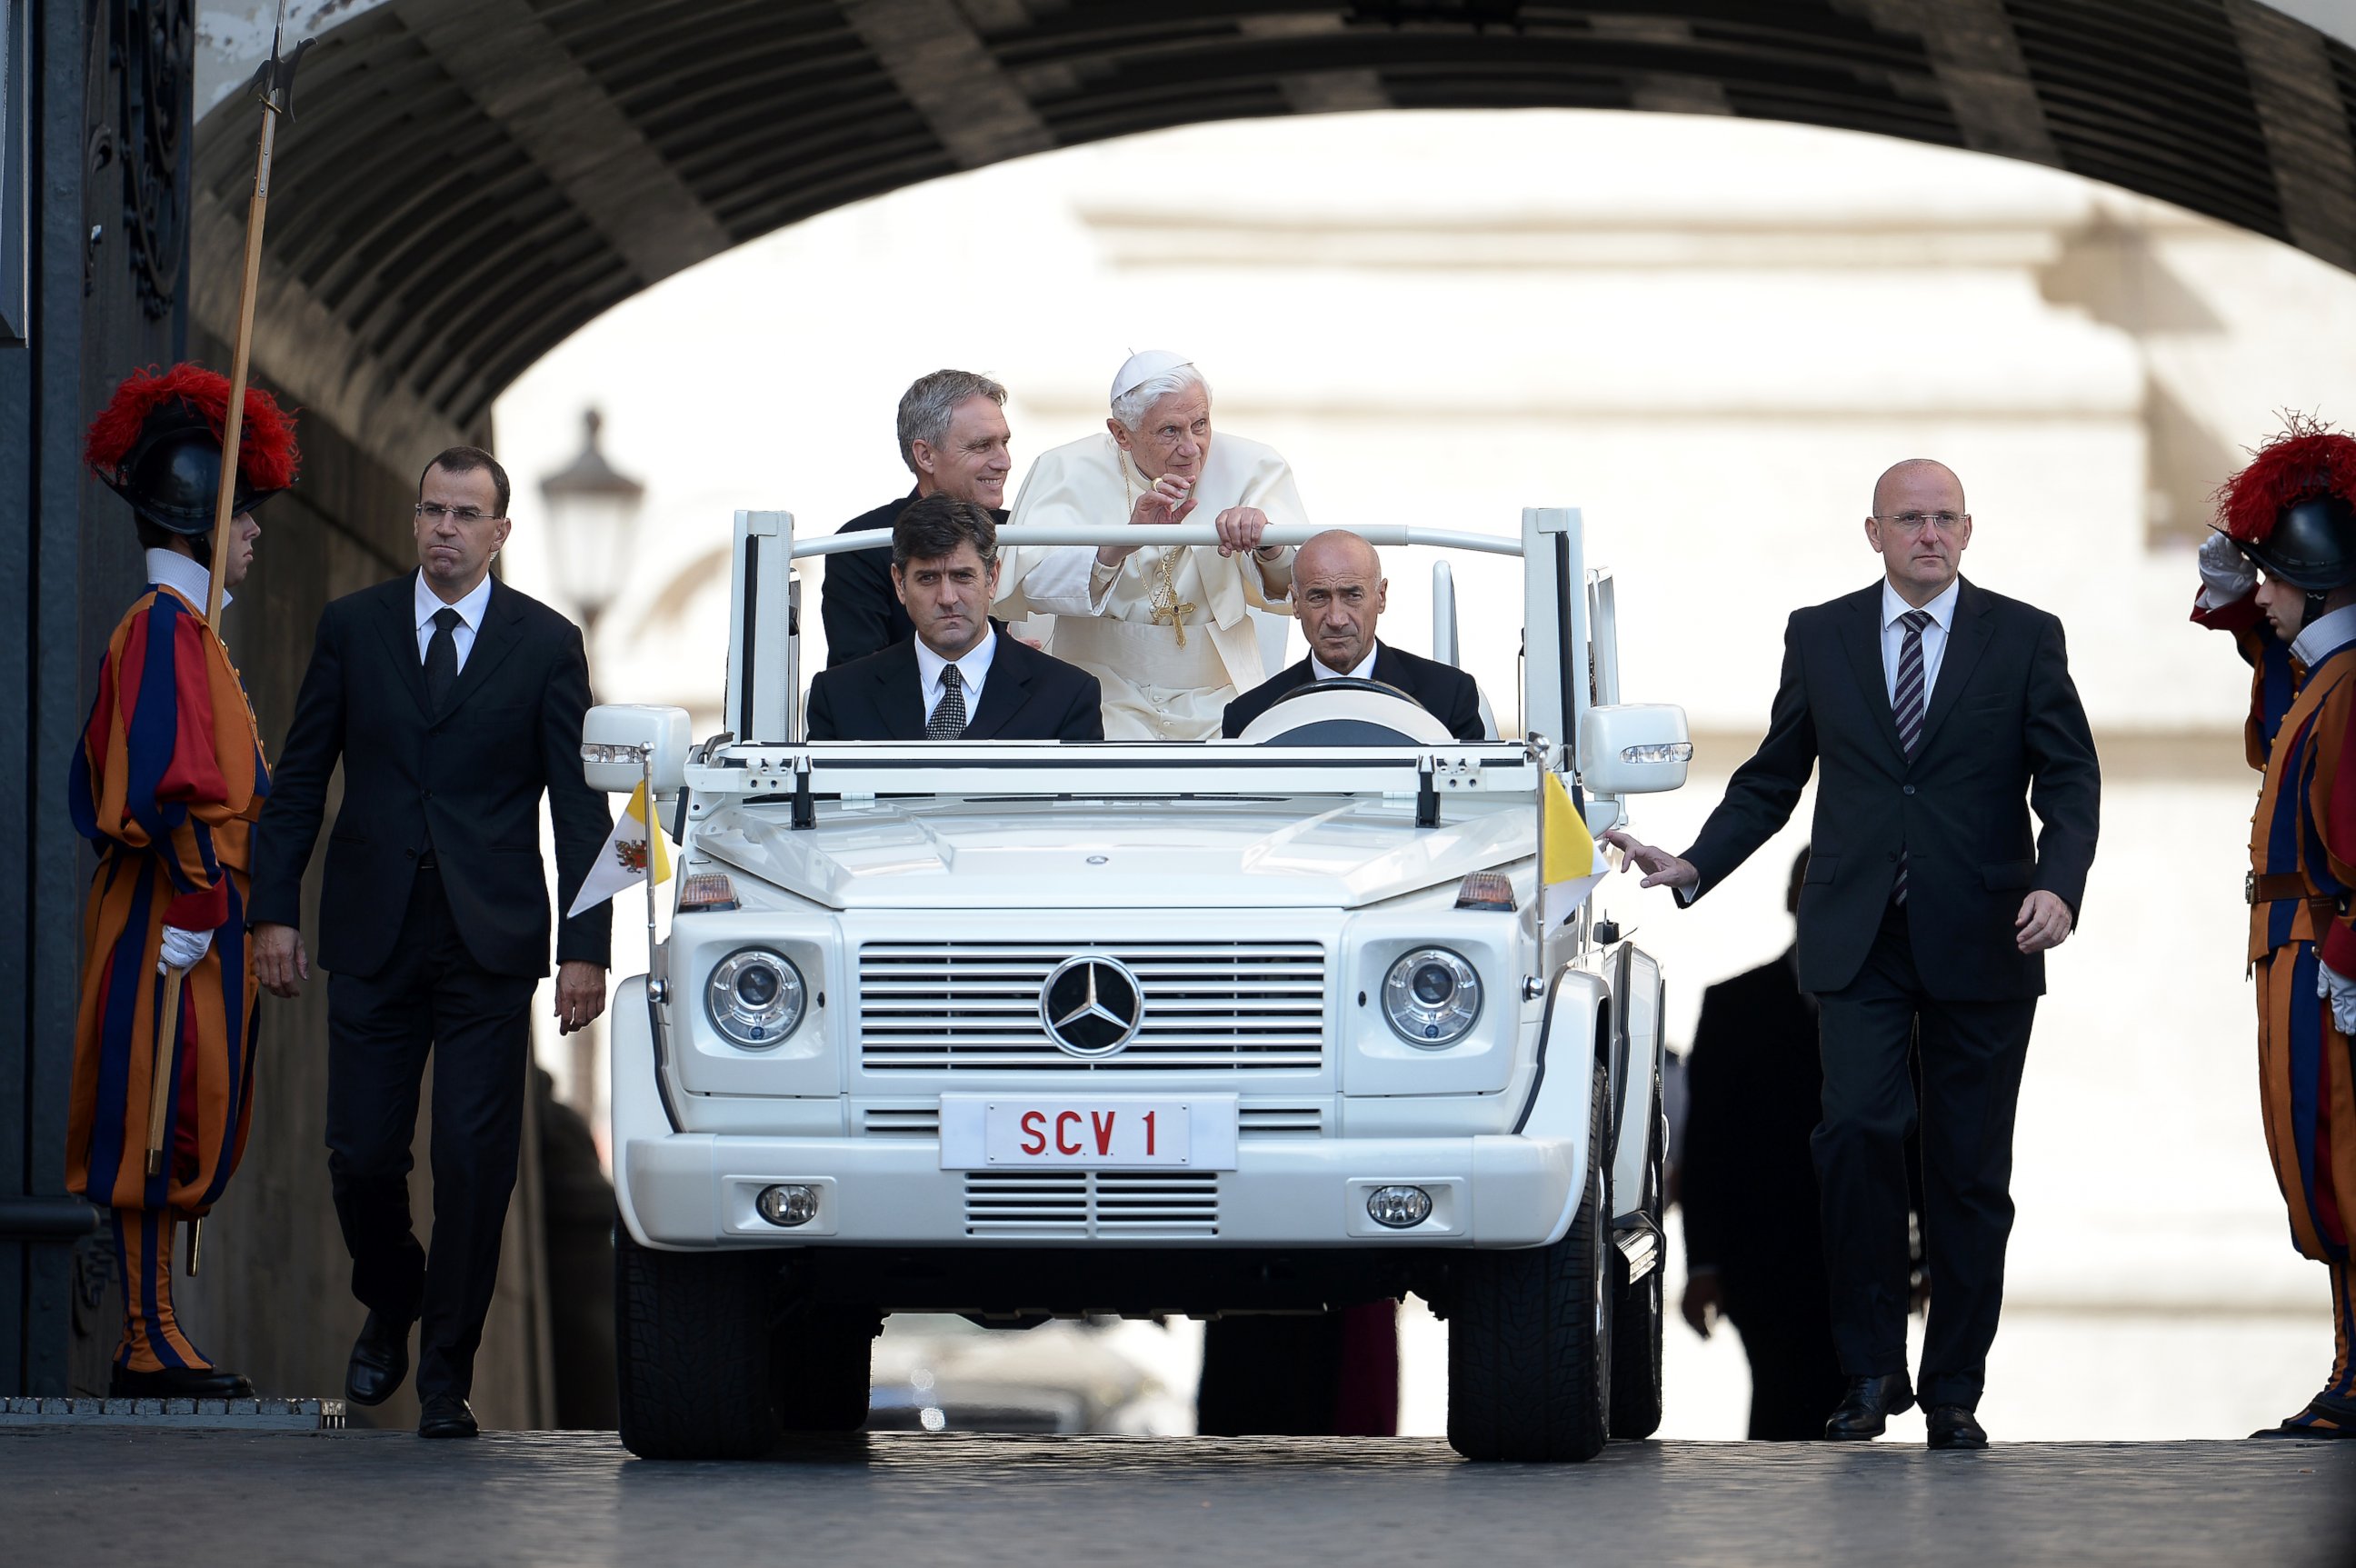 PHOTO: Pope Benedict XVI arrives in his Popemobile for his weekly general audience on Oct. 3, 2012 at St Peter's Square at The Vatican.  